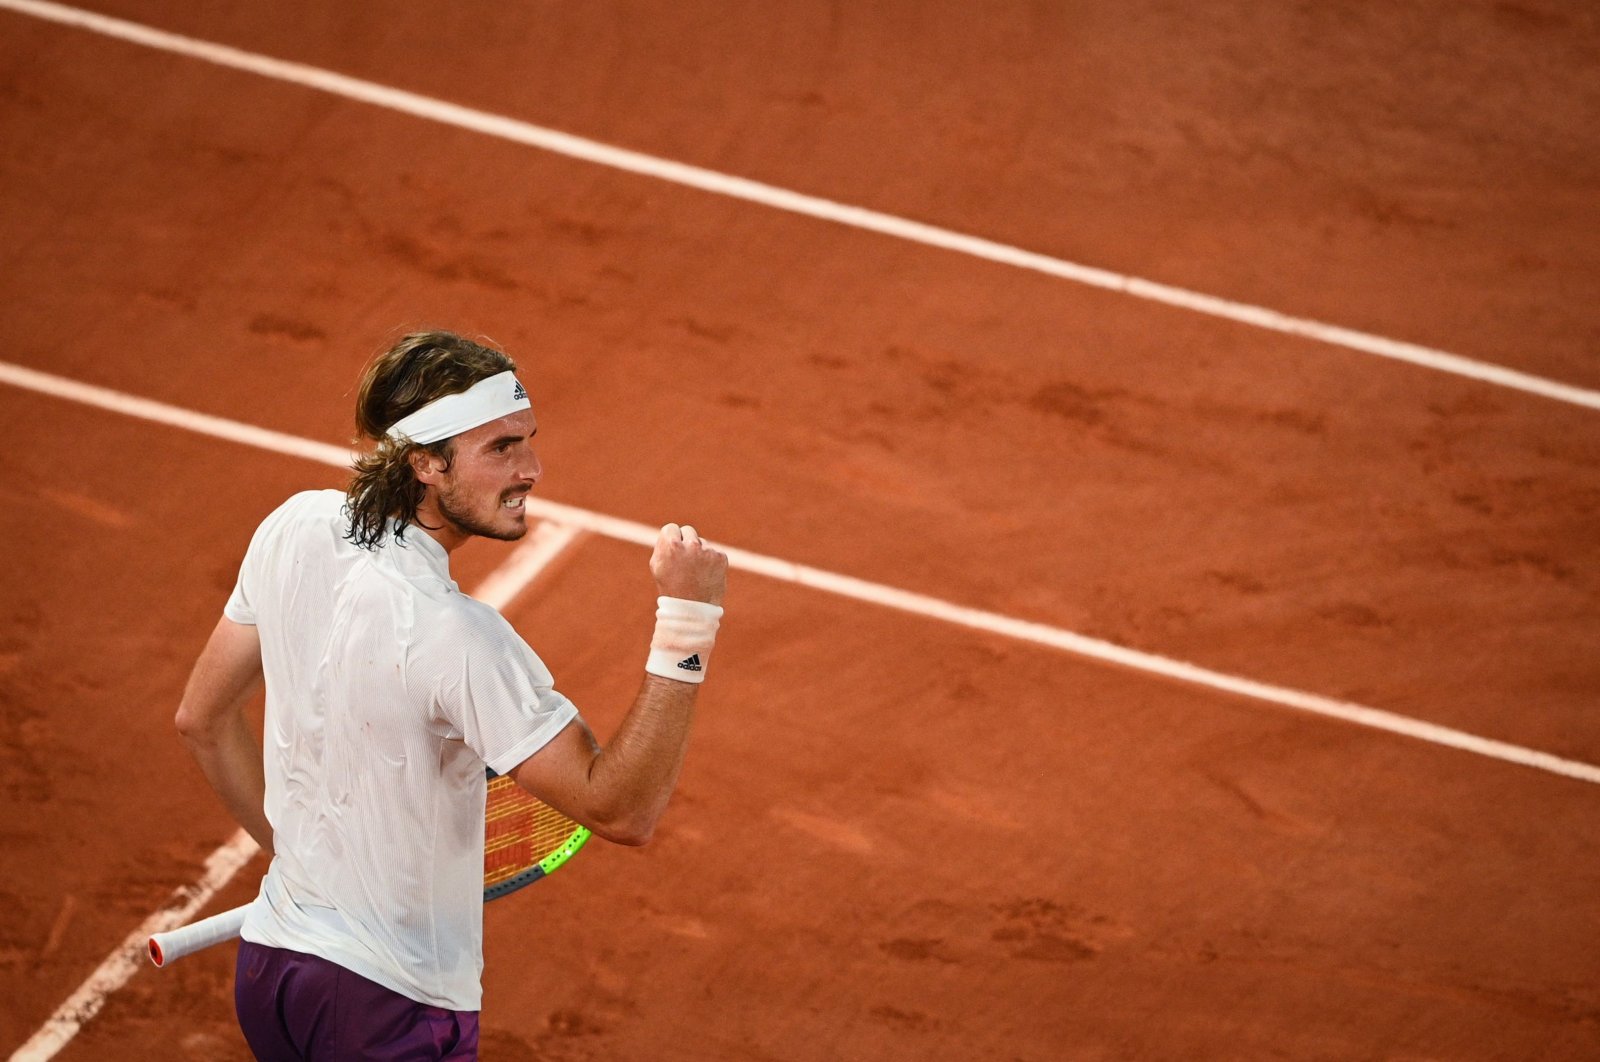 Greece's Stefanos Tsitsipas celebrates winning a point against Russia's Daniil Medvedev during their French Open quarterfinal match at the Roland Garros, Paris, France, June 8, 2021. (AFP Photo)